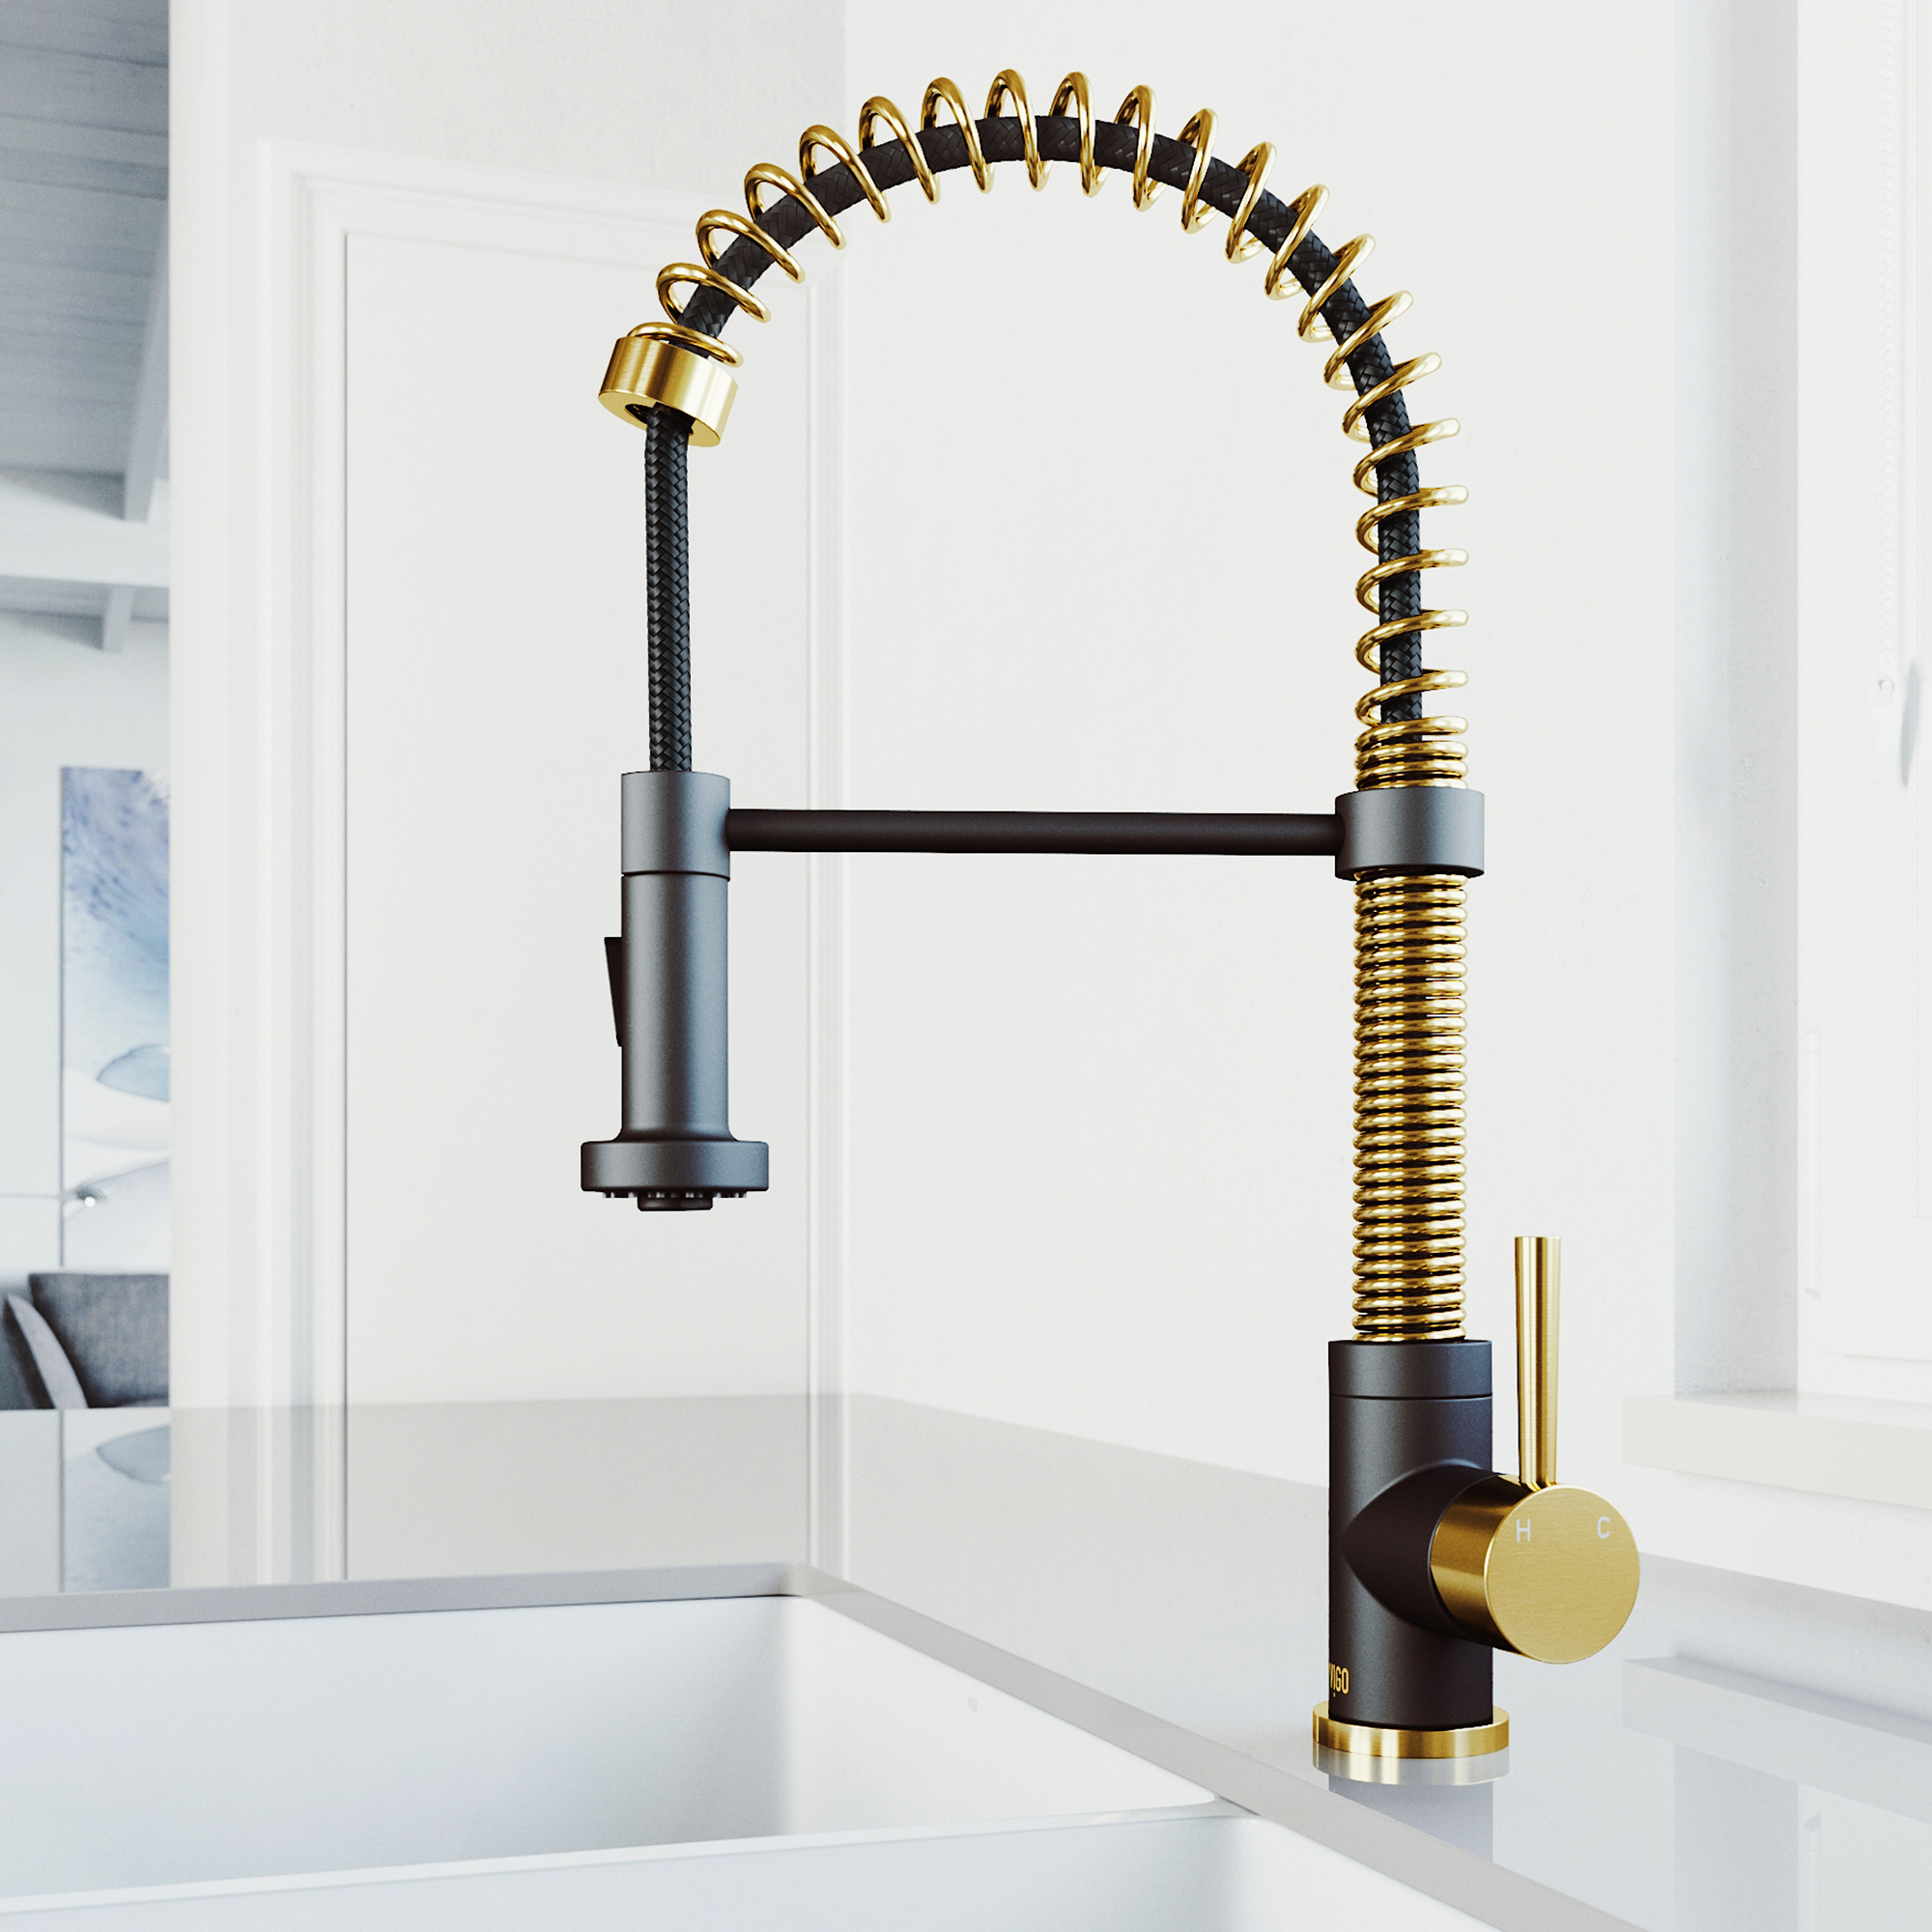 VIGO Edison Single Handle Pull-Down Sprayer Kitchen Faucet in Matte Brushed Gold and Matte Black - image 1 of 10